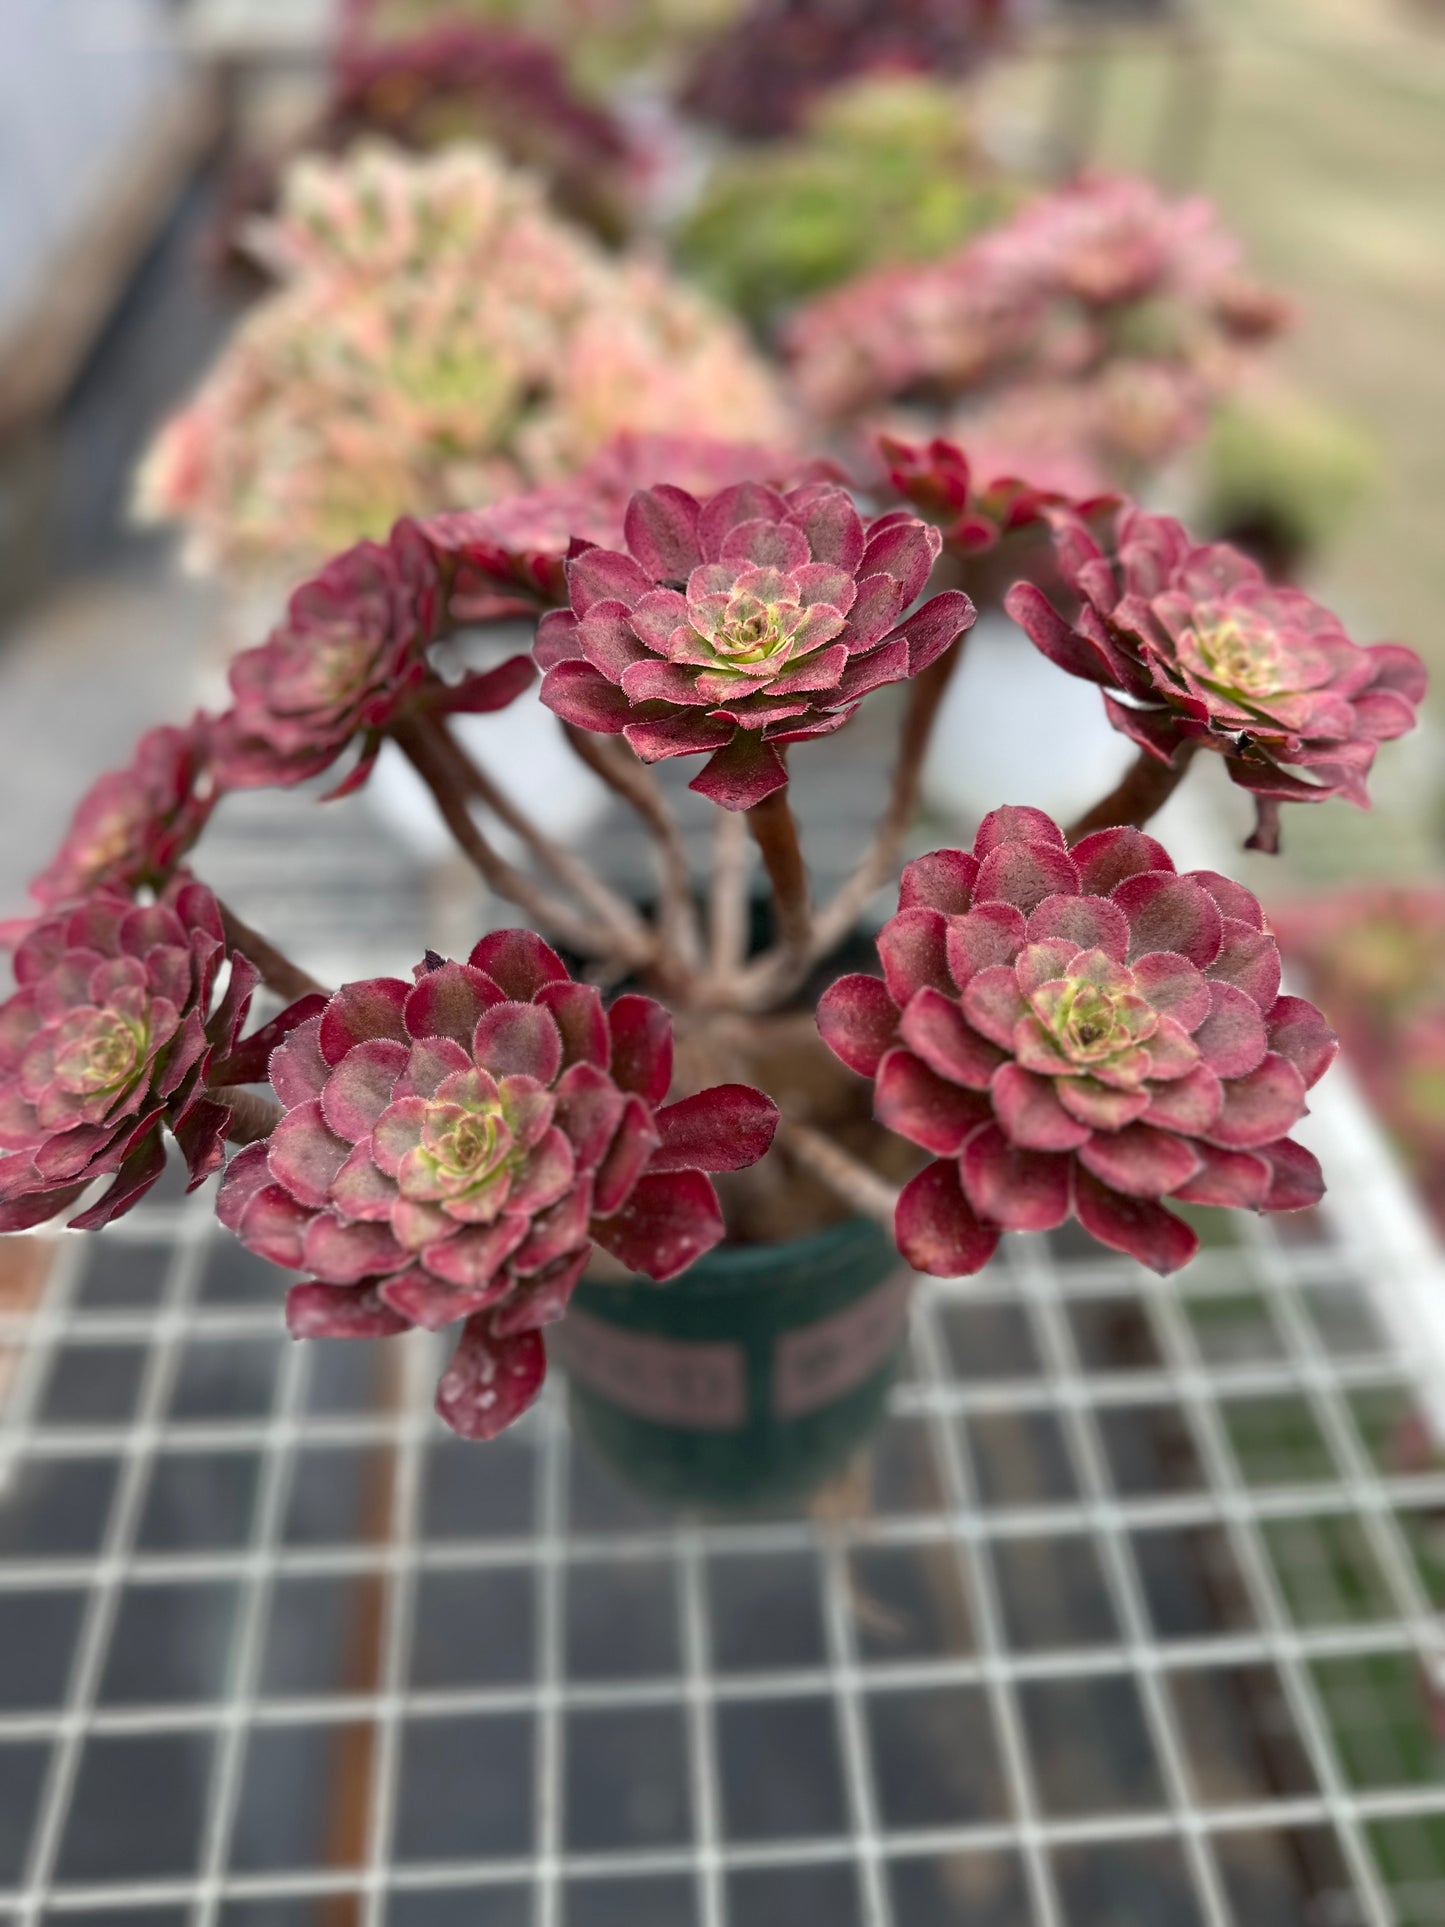 Pinky cluster20-30cm Old pile/ 5-10 heads/ Aeonium cluster / Variegated Natural Live Plants Succulents2023